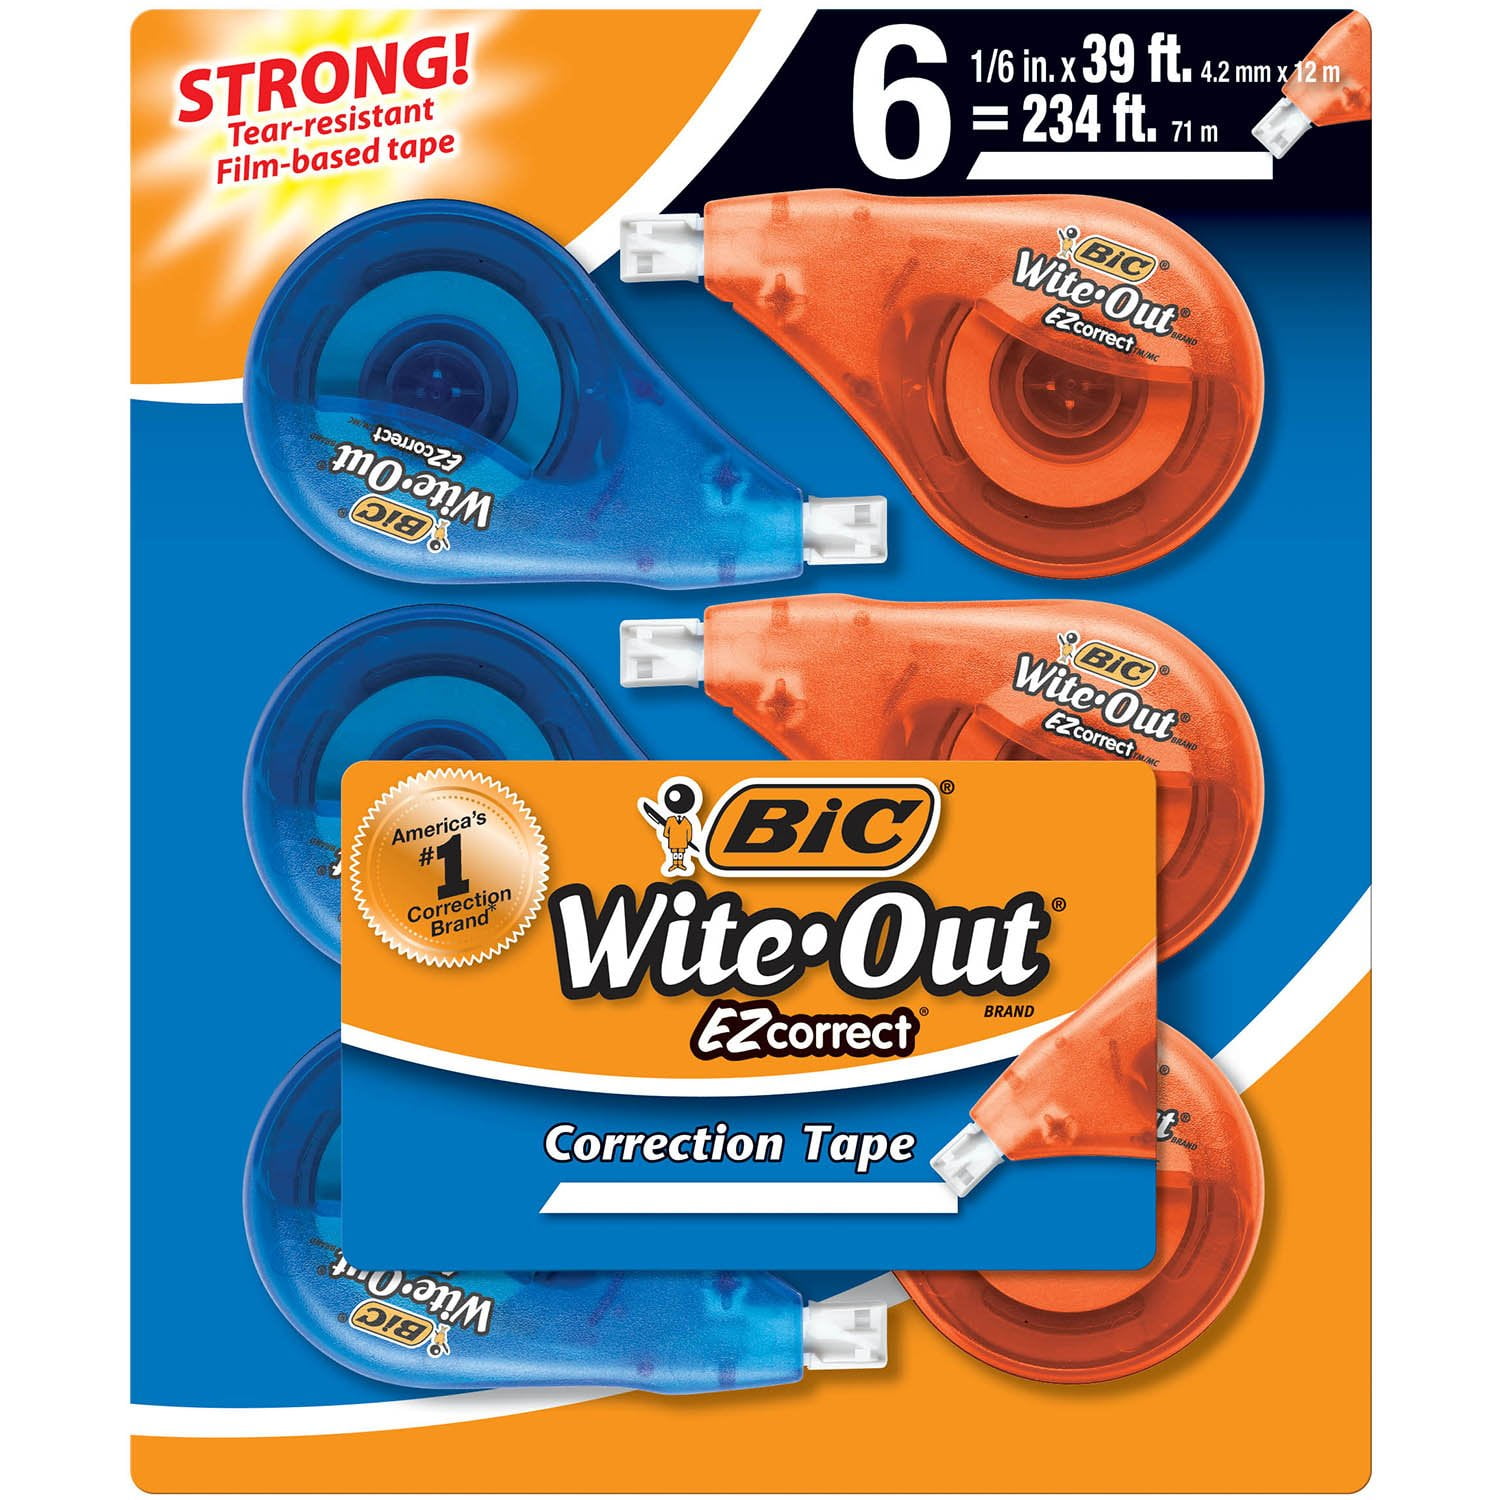 Bic Wite-Out EZ Correct Correction Tape, White, Fast, Clean & Easy to Use, Tear-resistant Tape, 4-Count Pack (WOTAPP418-WHI)